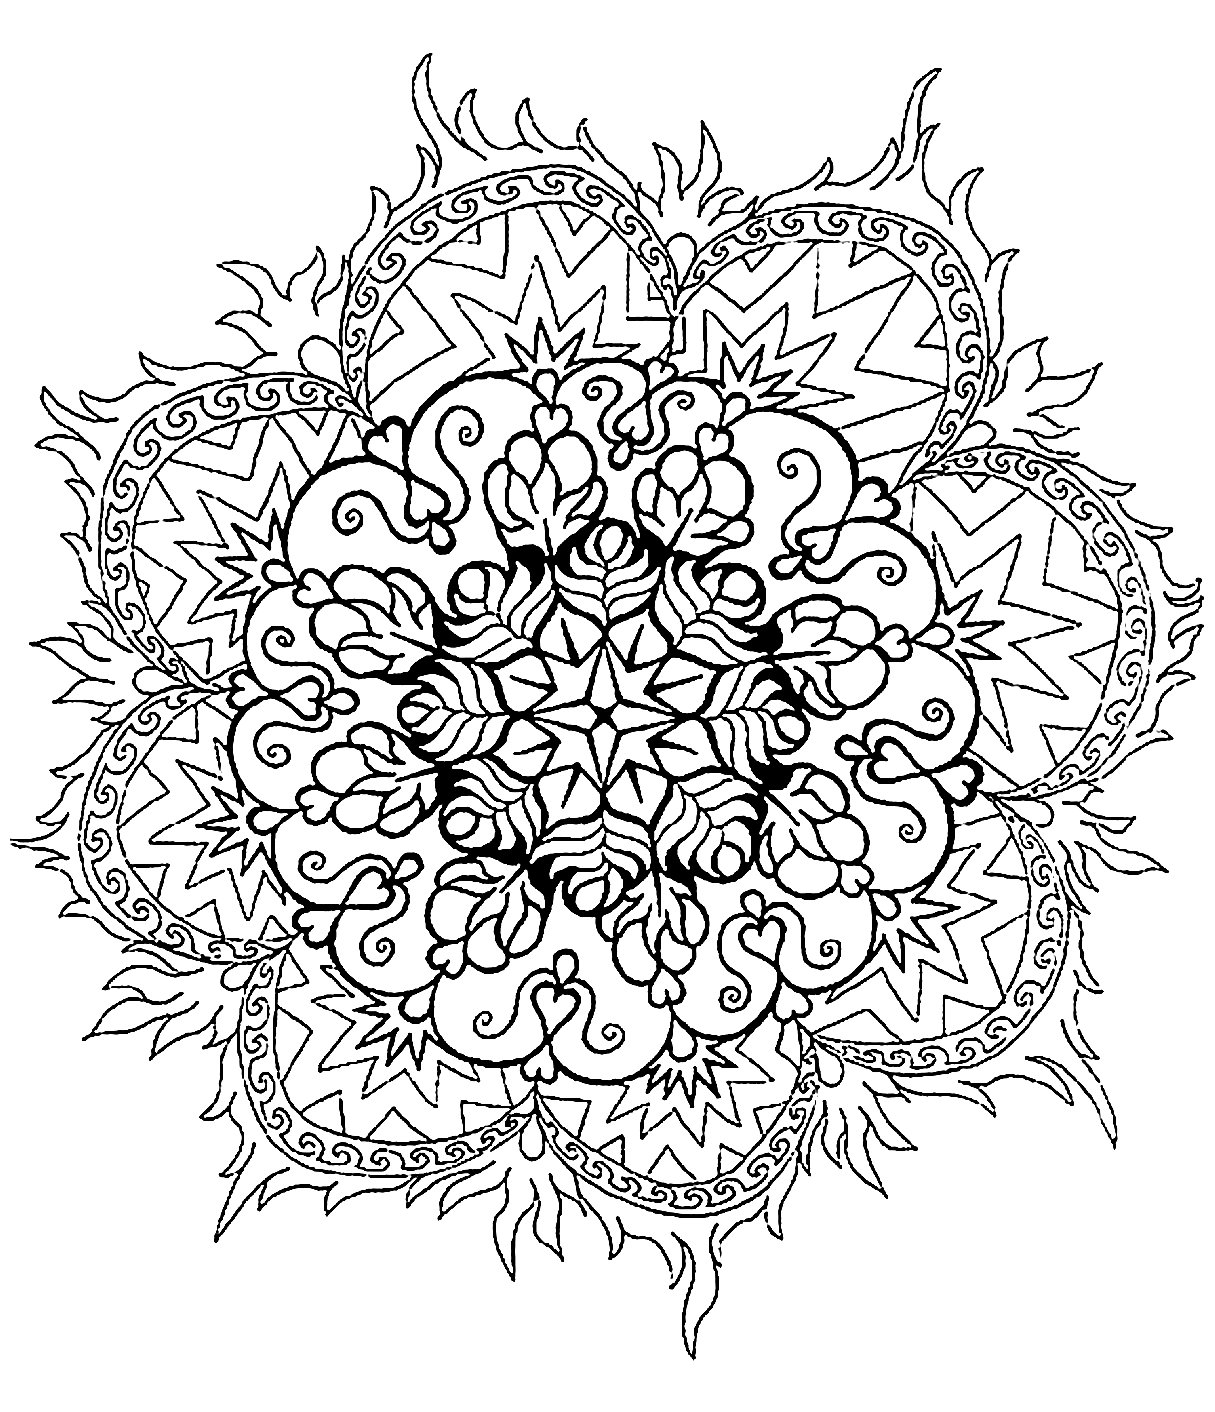 Mandala to color difficult - 4